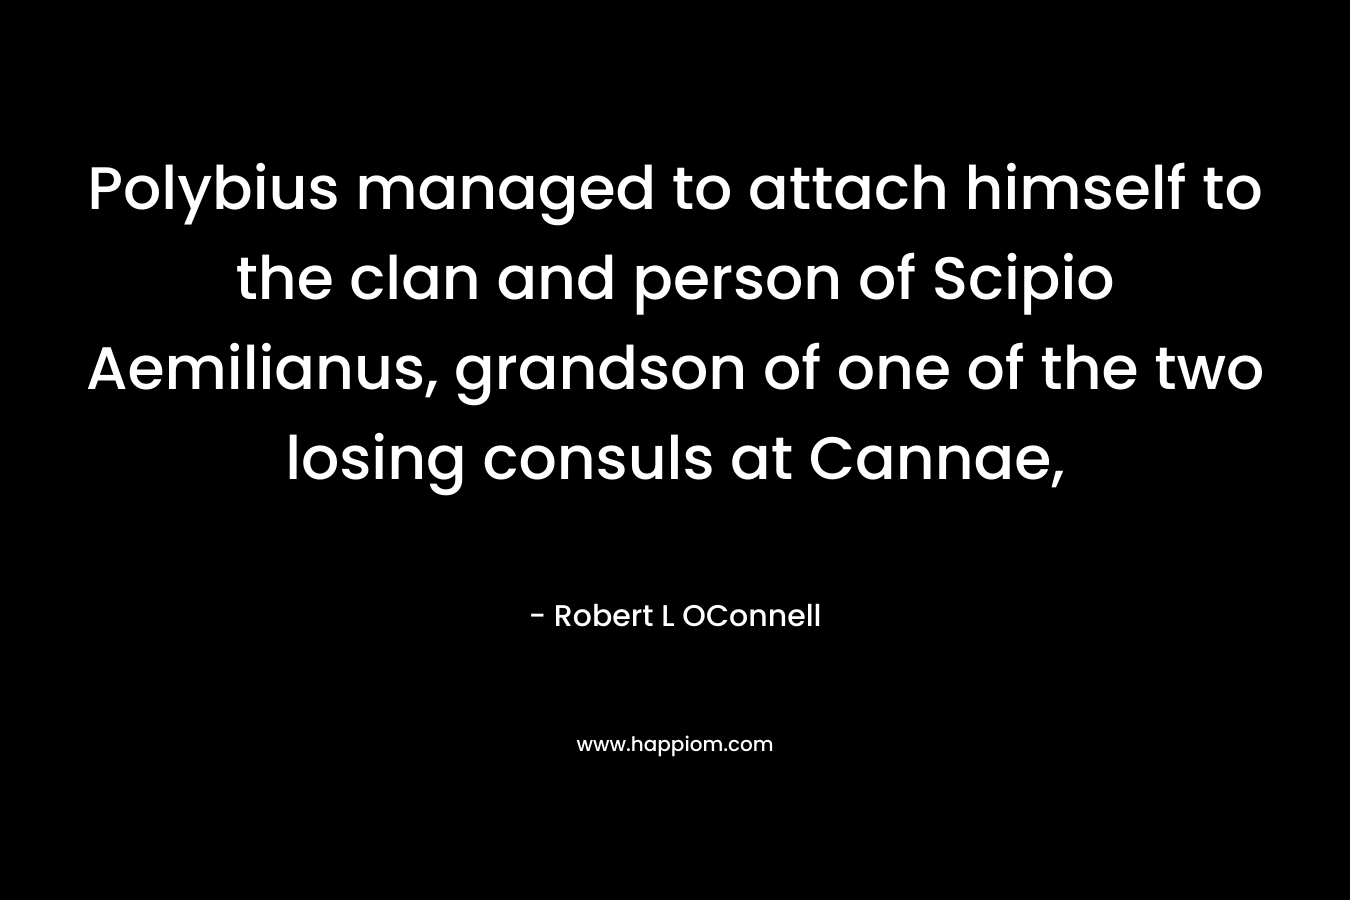 Polybius managed to attach himself to the clan and person of Scipio Aemilianus, grandson of one of the two losing consuls at Cannae, – Robert L OConnell